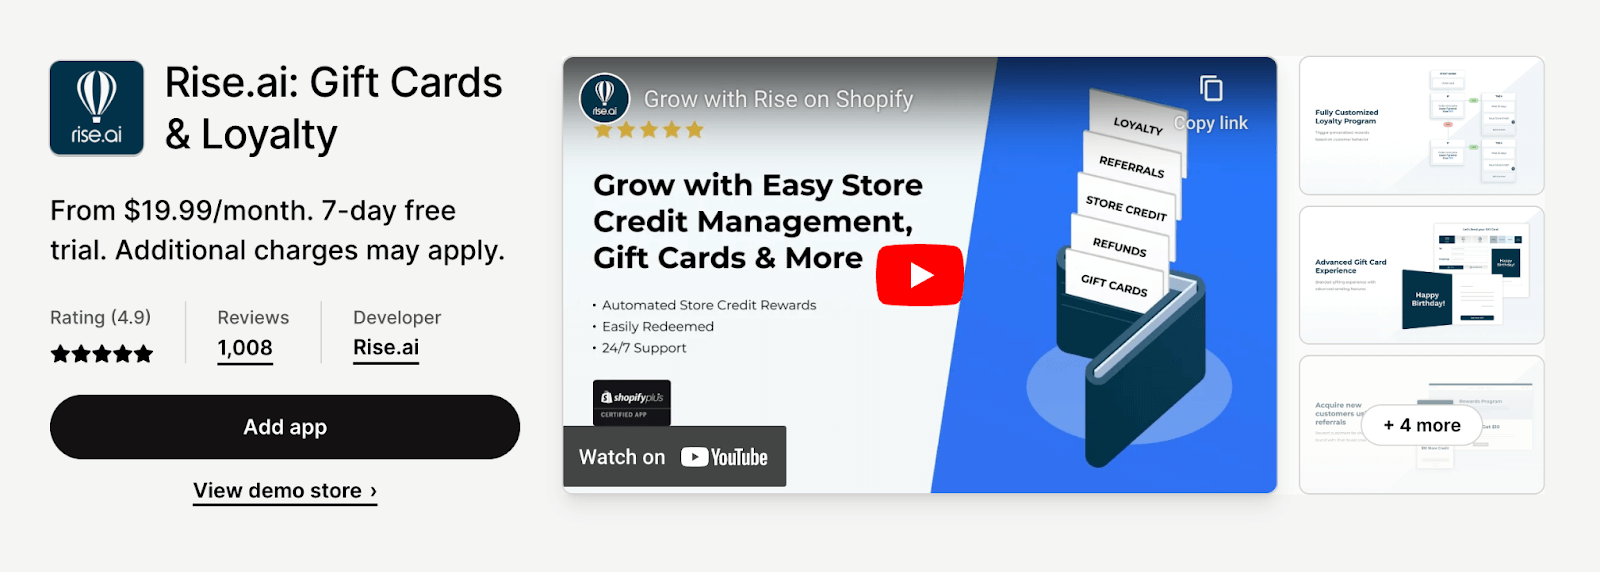 Rise.ai: Gift Cards & Loyalty